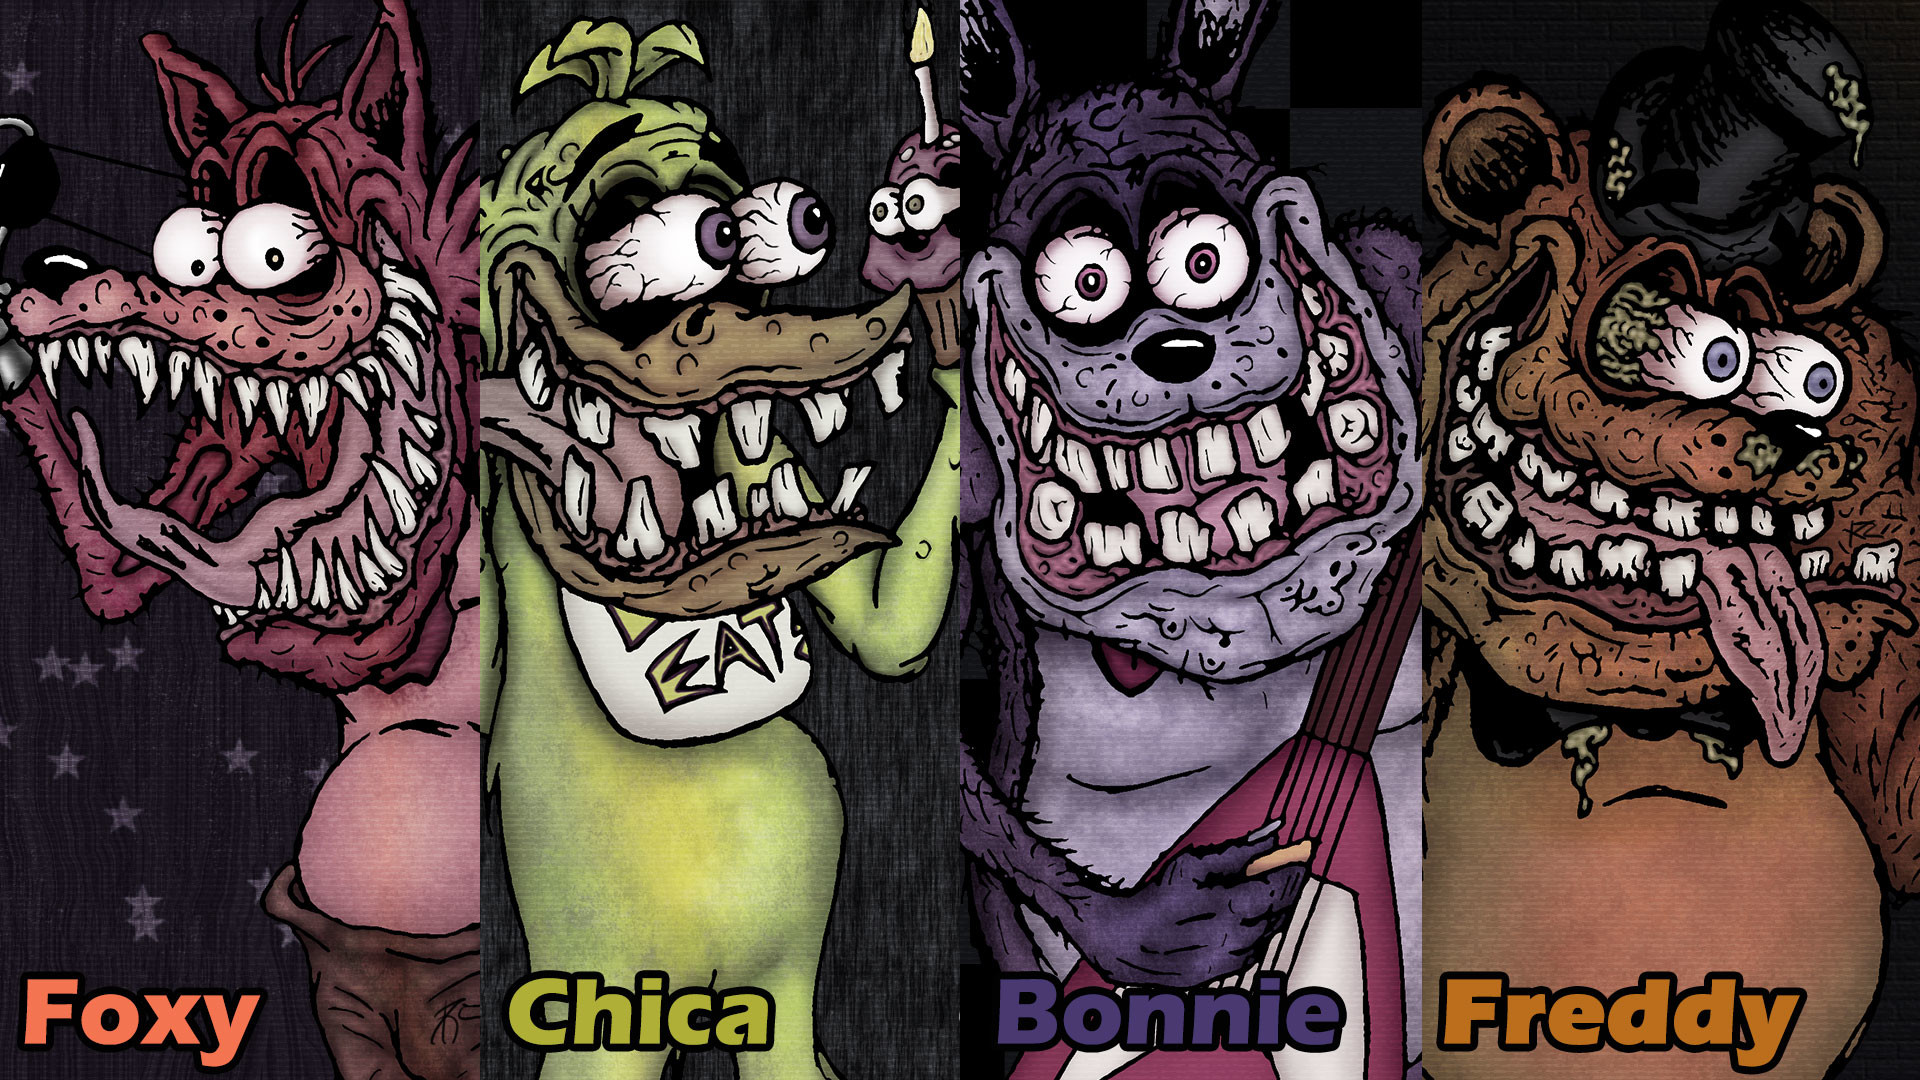 … Five Nights at Freddy – Ed Roth Style (Wallpaper) by SestrenNK